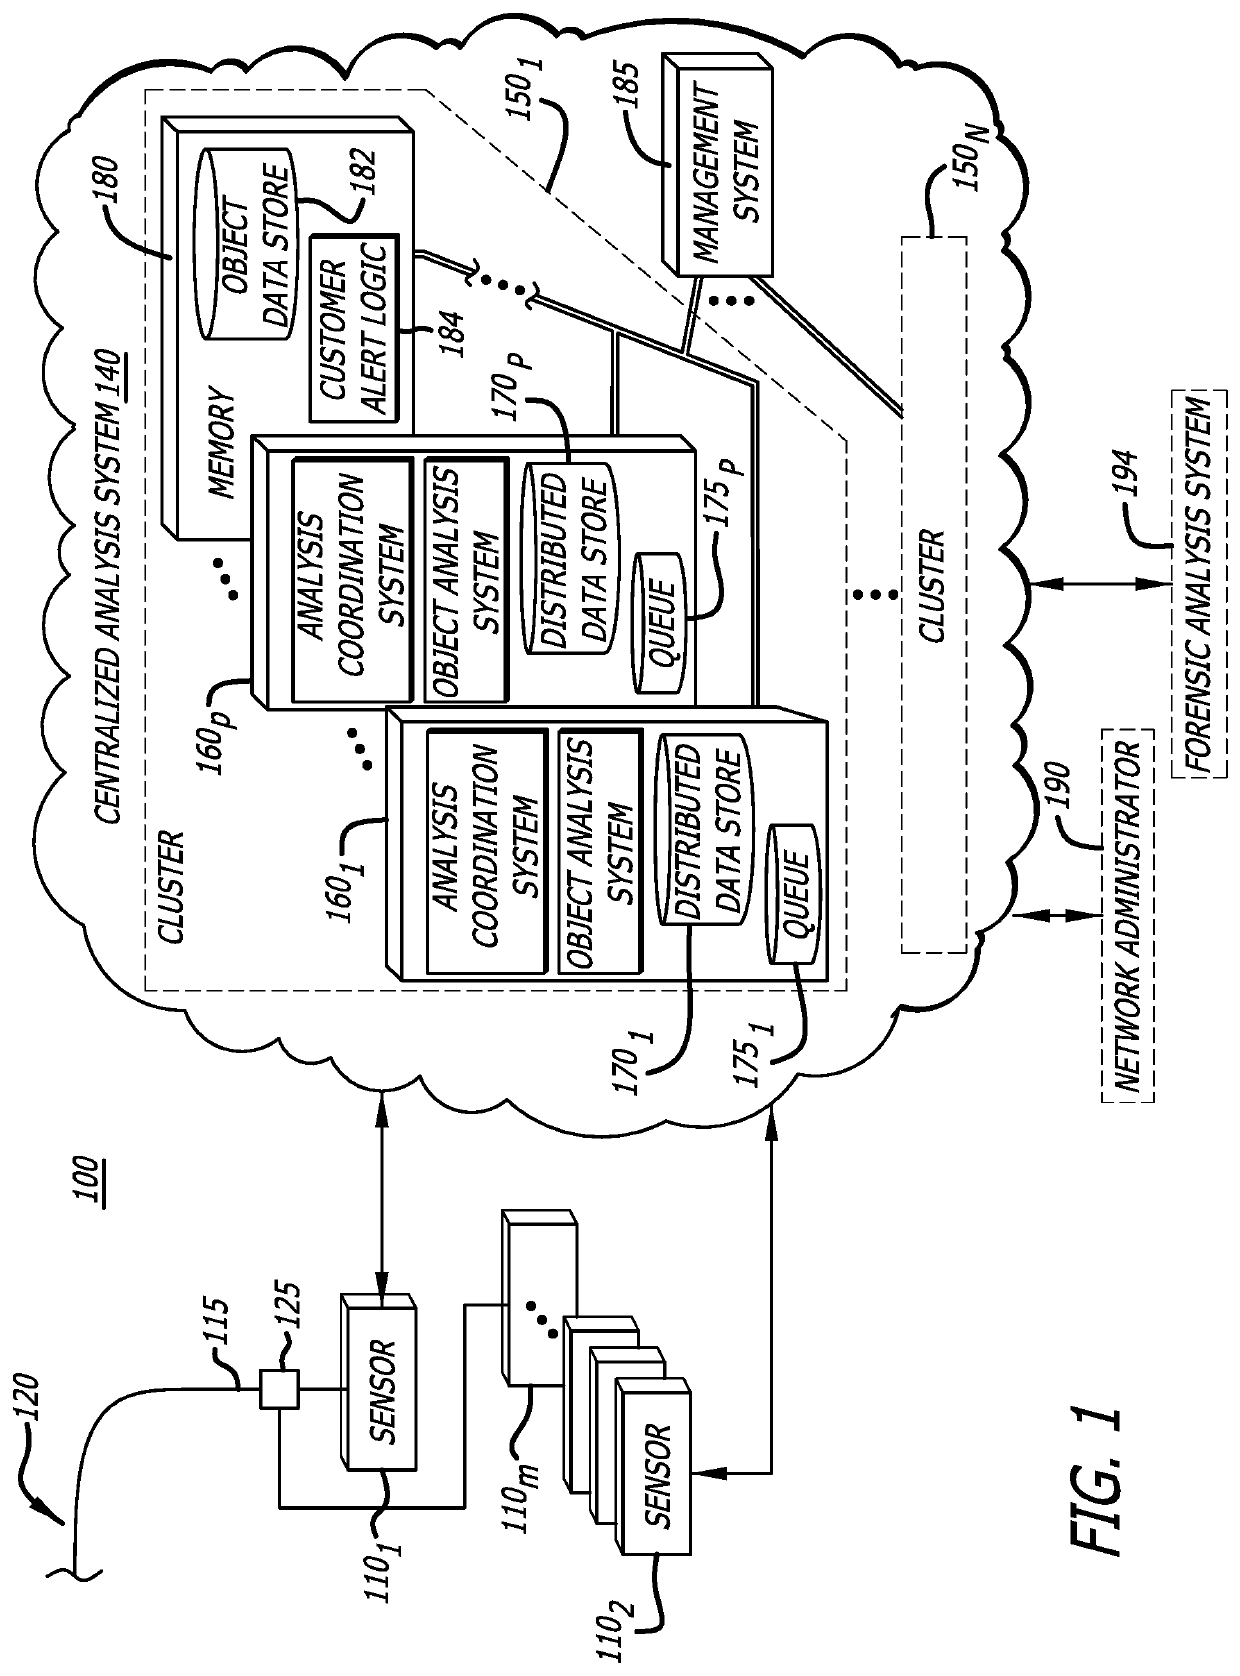 Distributed malware detection system and submission workflow thereof